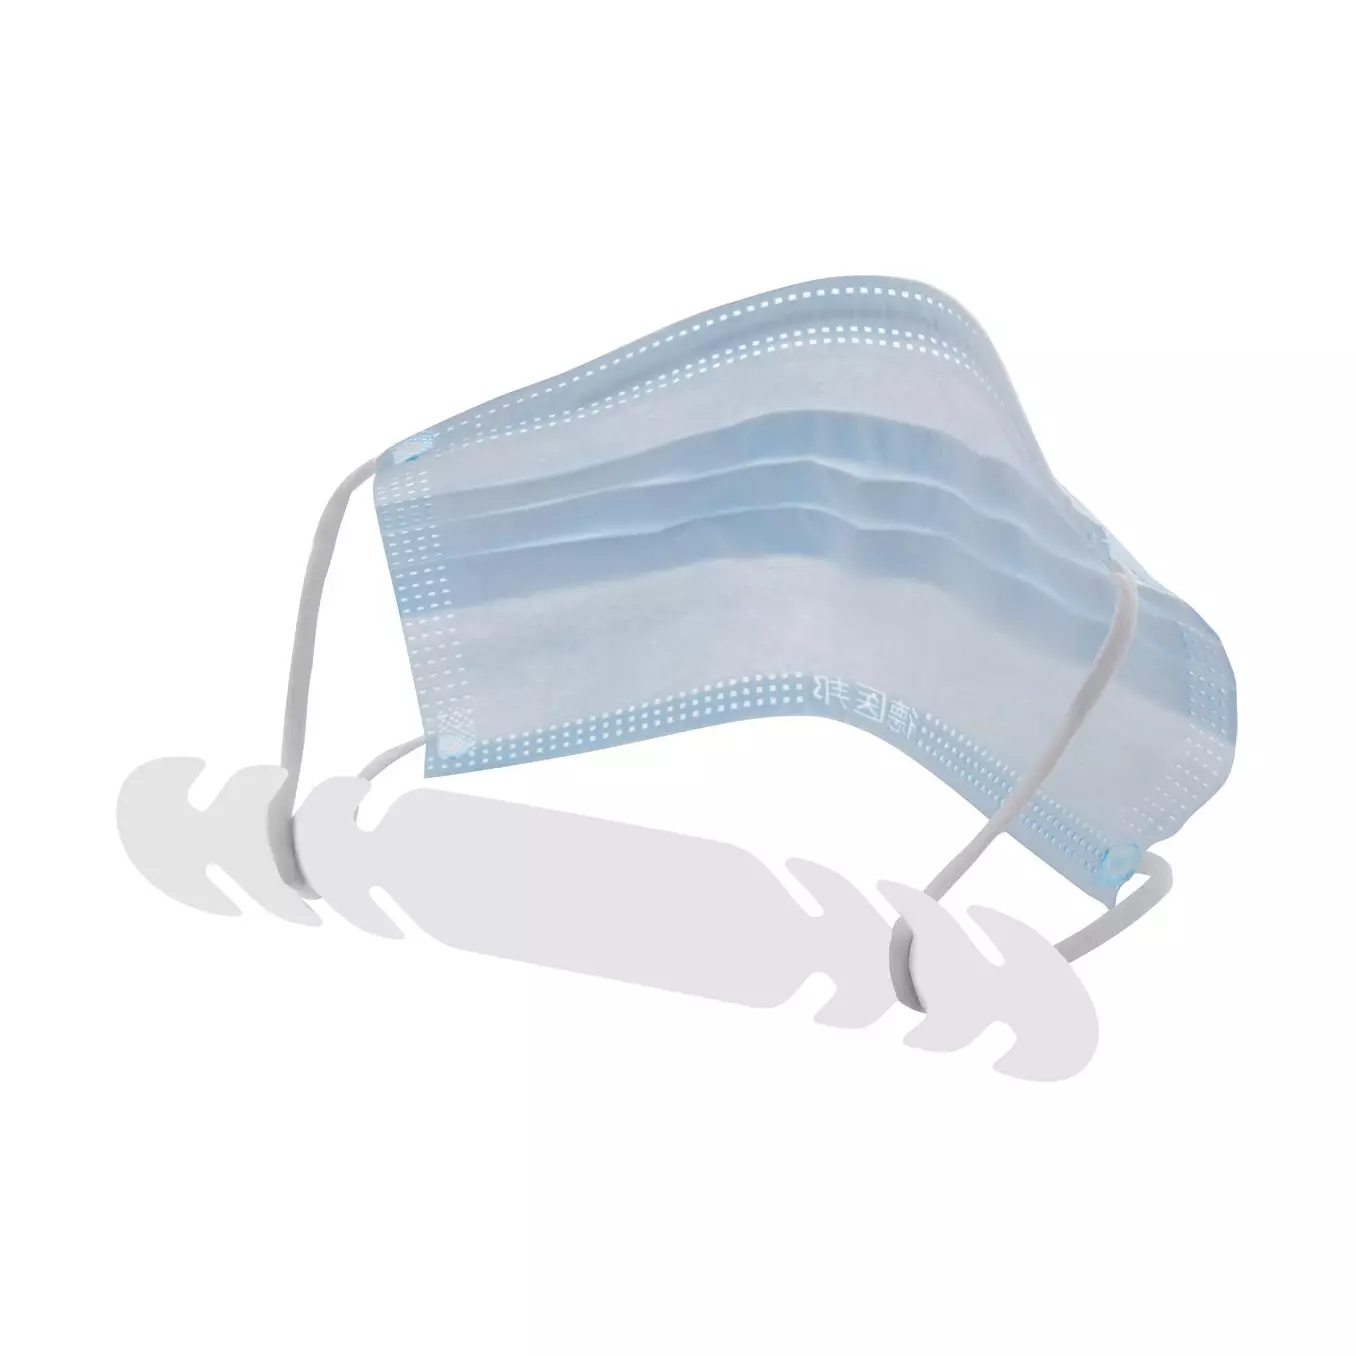 Mask holder/extension for mouth-nose protection